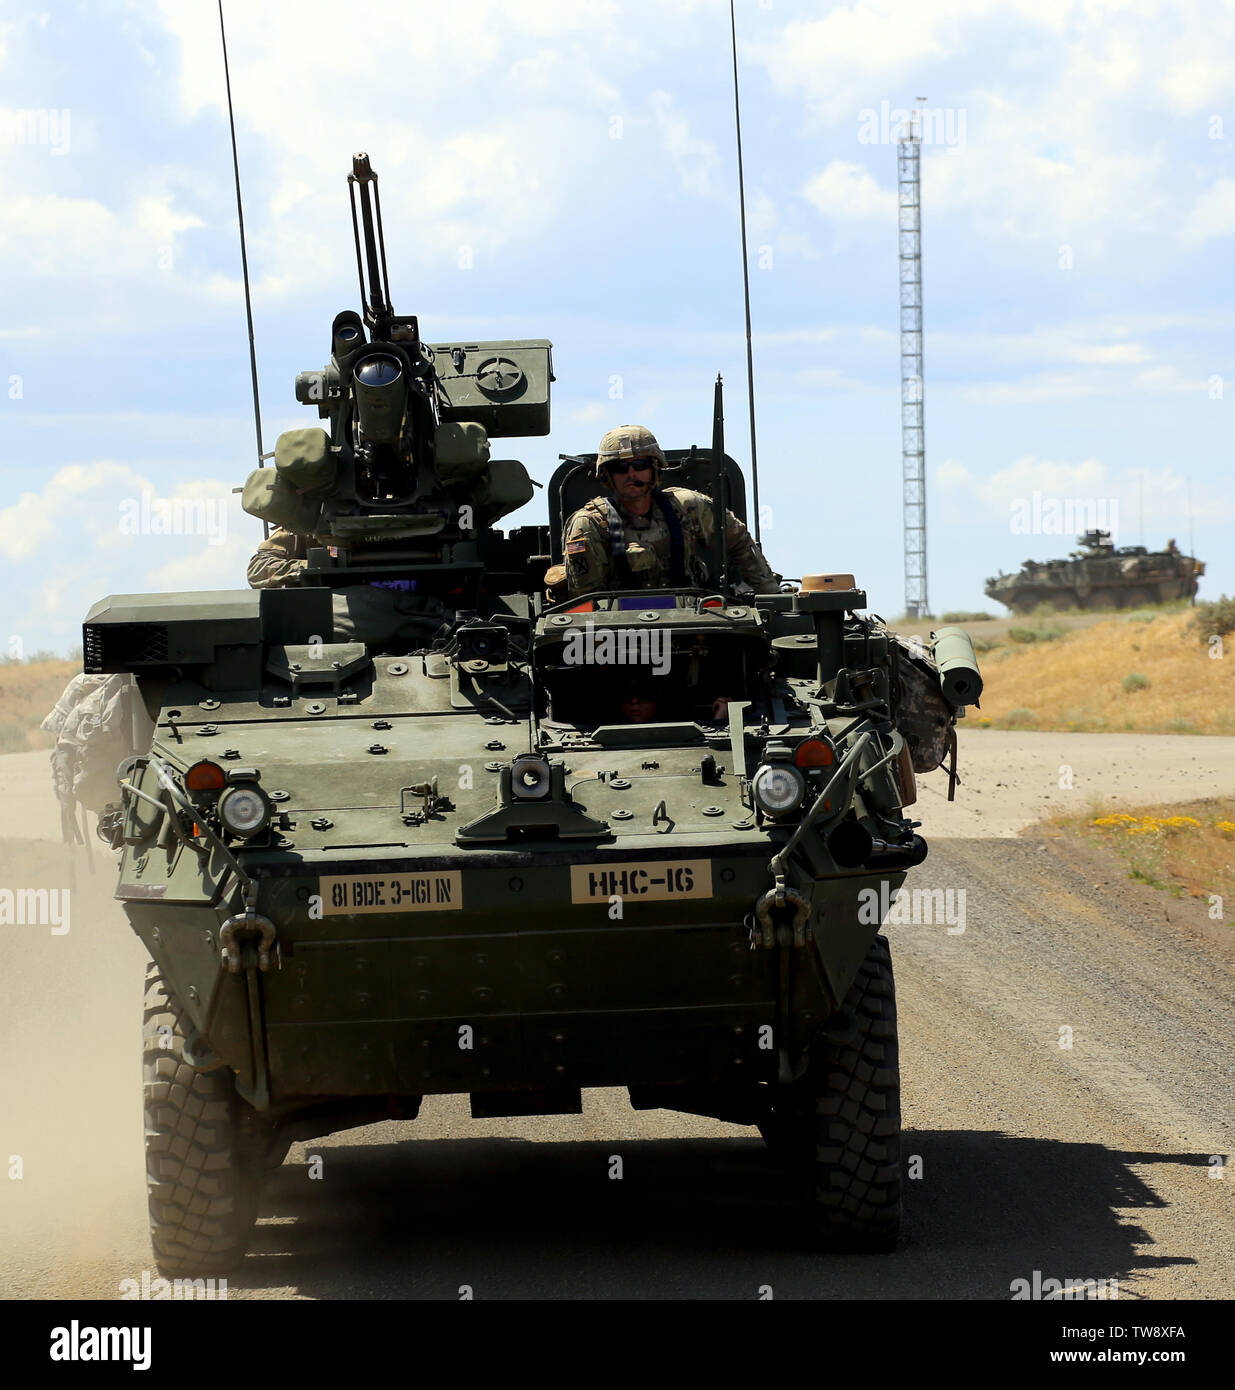 A Stryker from HHC, 3rd Battalion, 161st Infantry Regiment, makes its way to the range duringa platoon live fire exercise at Yakima Training Center. The 3-161 Infantry are participating in Bayonet Focus as a lead up to an NTC rotation next year. Stock Photo